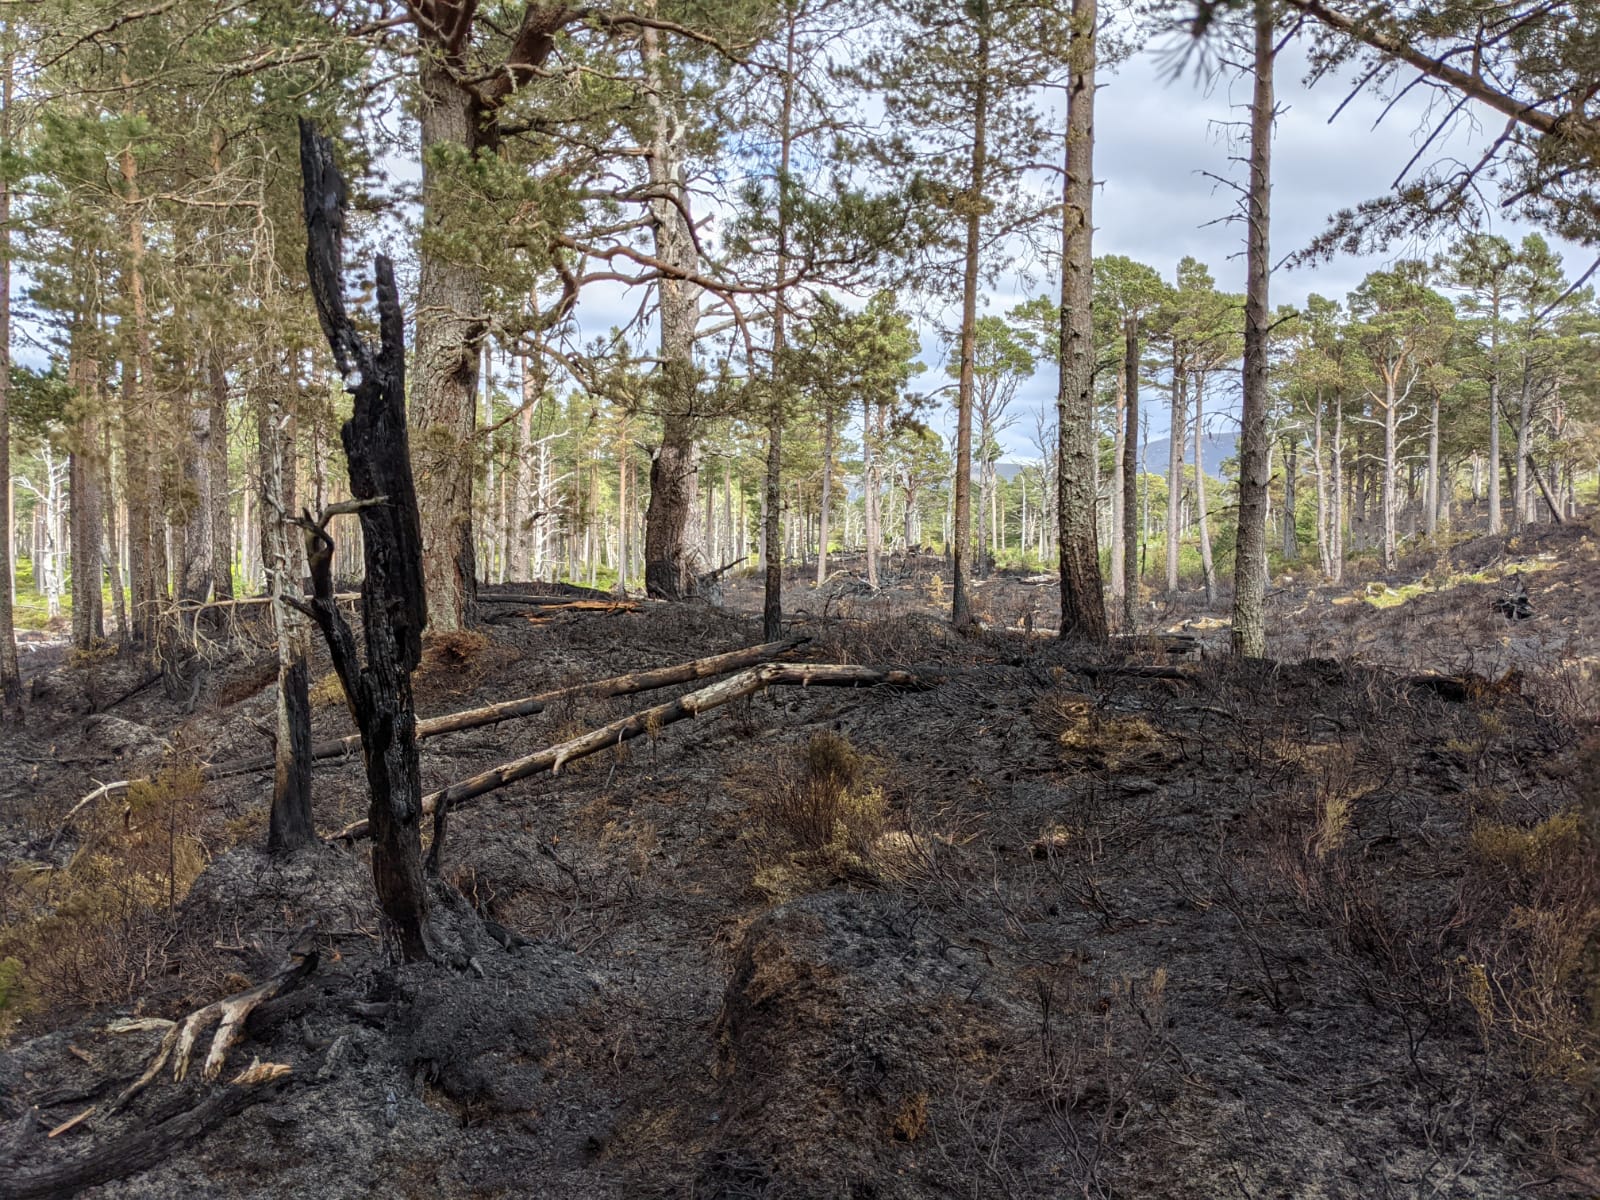 The ground was left scorched by the wildfire.